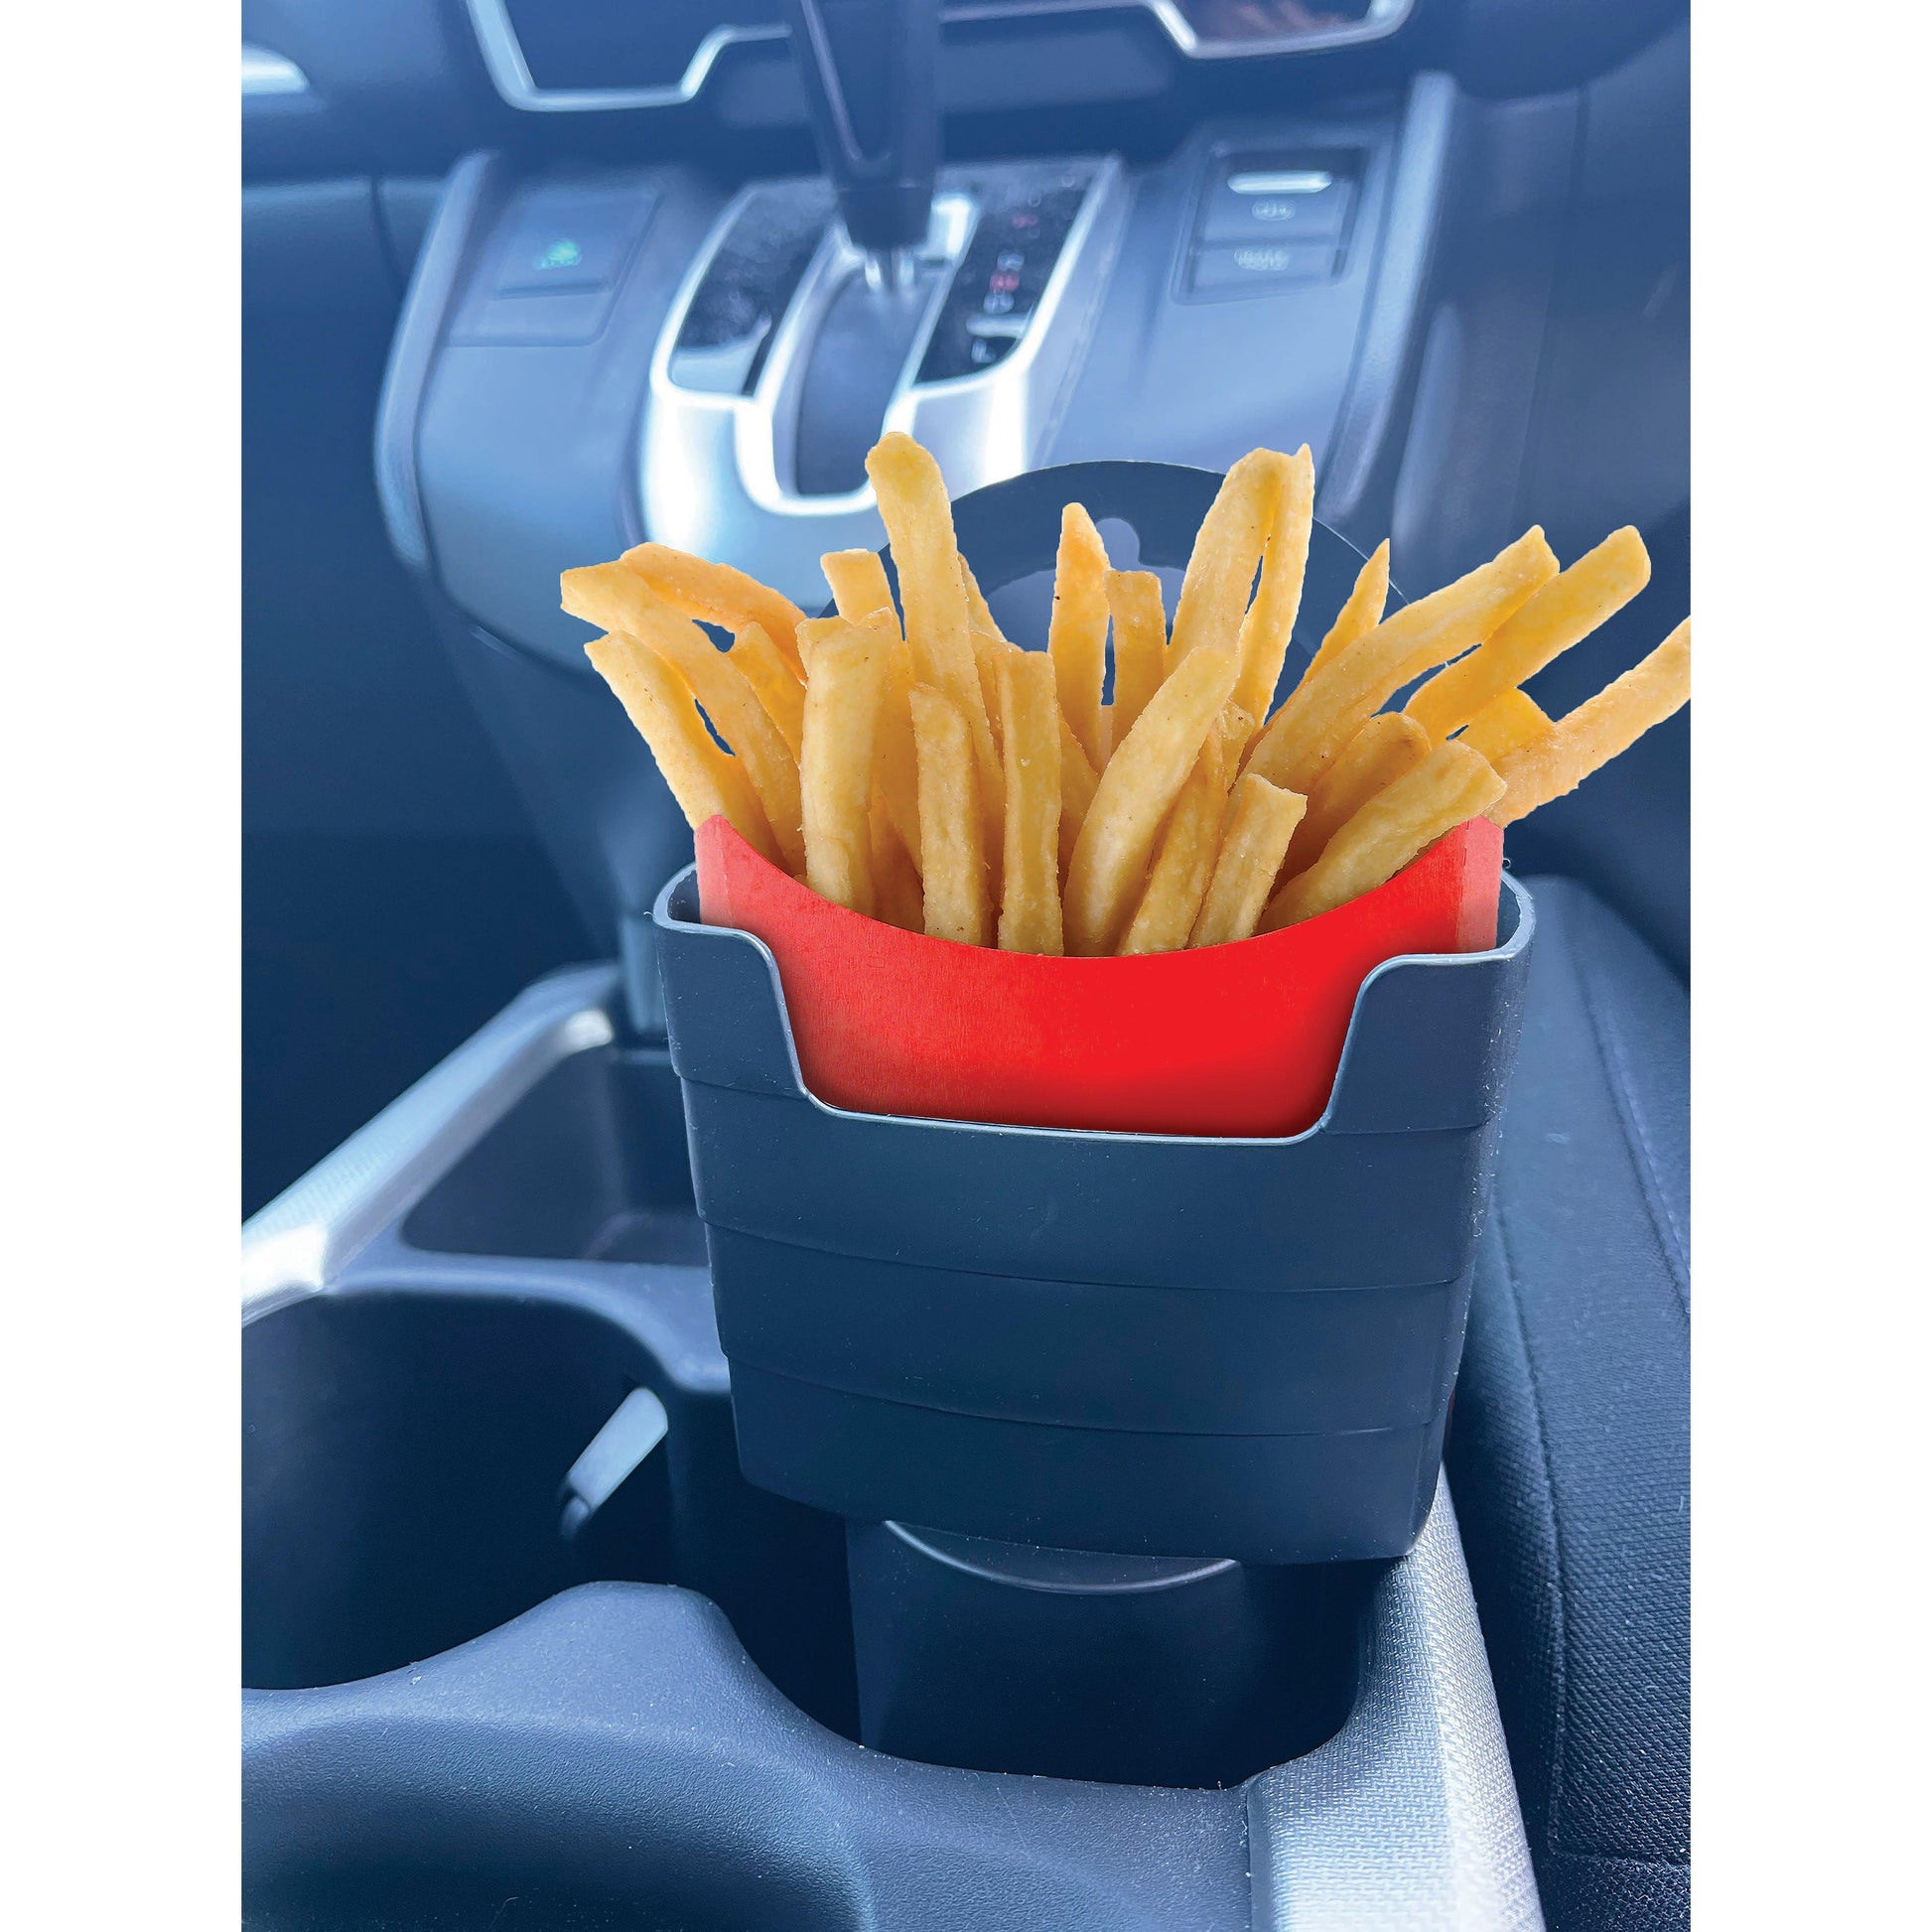 In Car Chips and Sauce Set - Handworks Nouveau Paperie